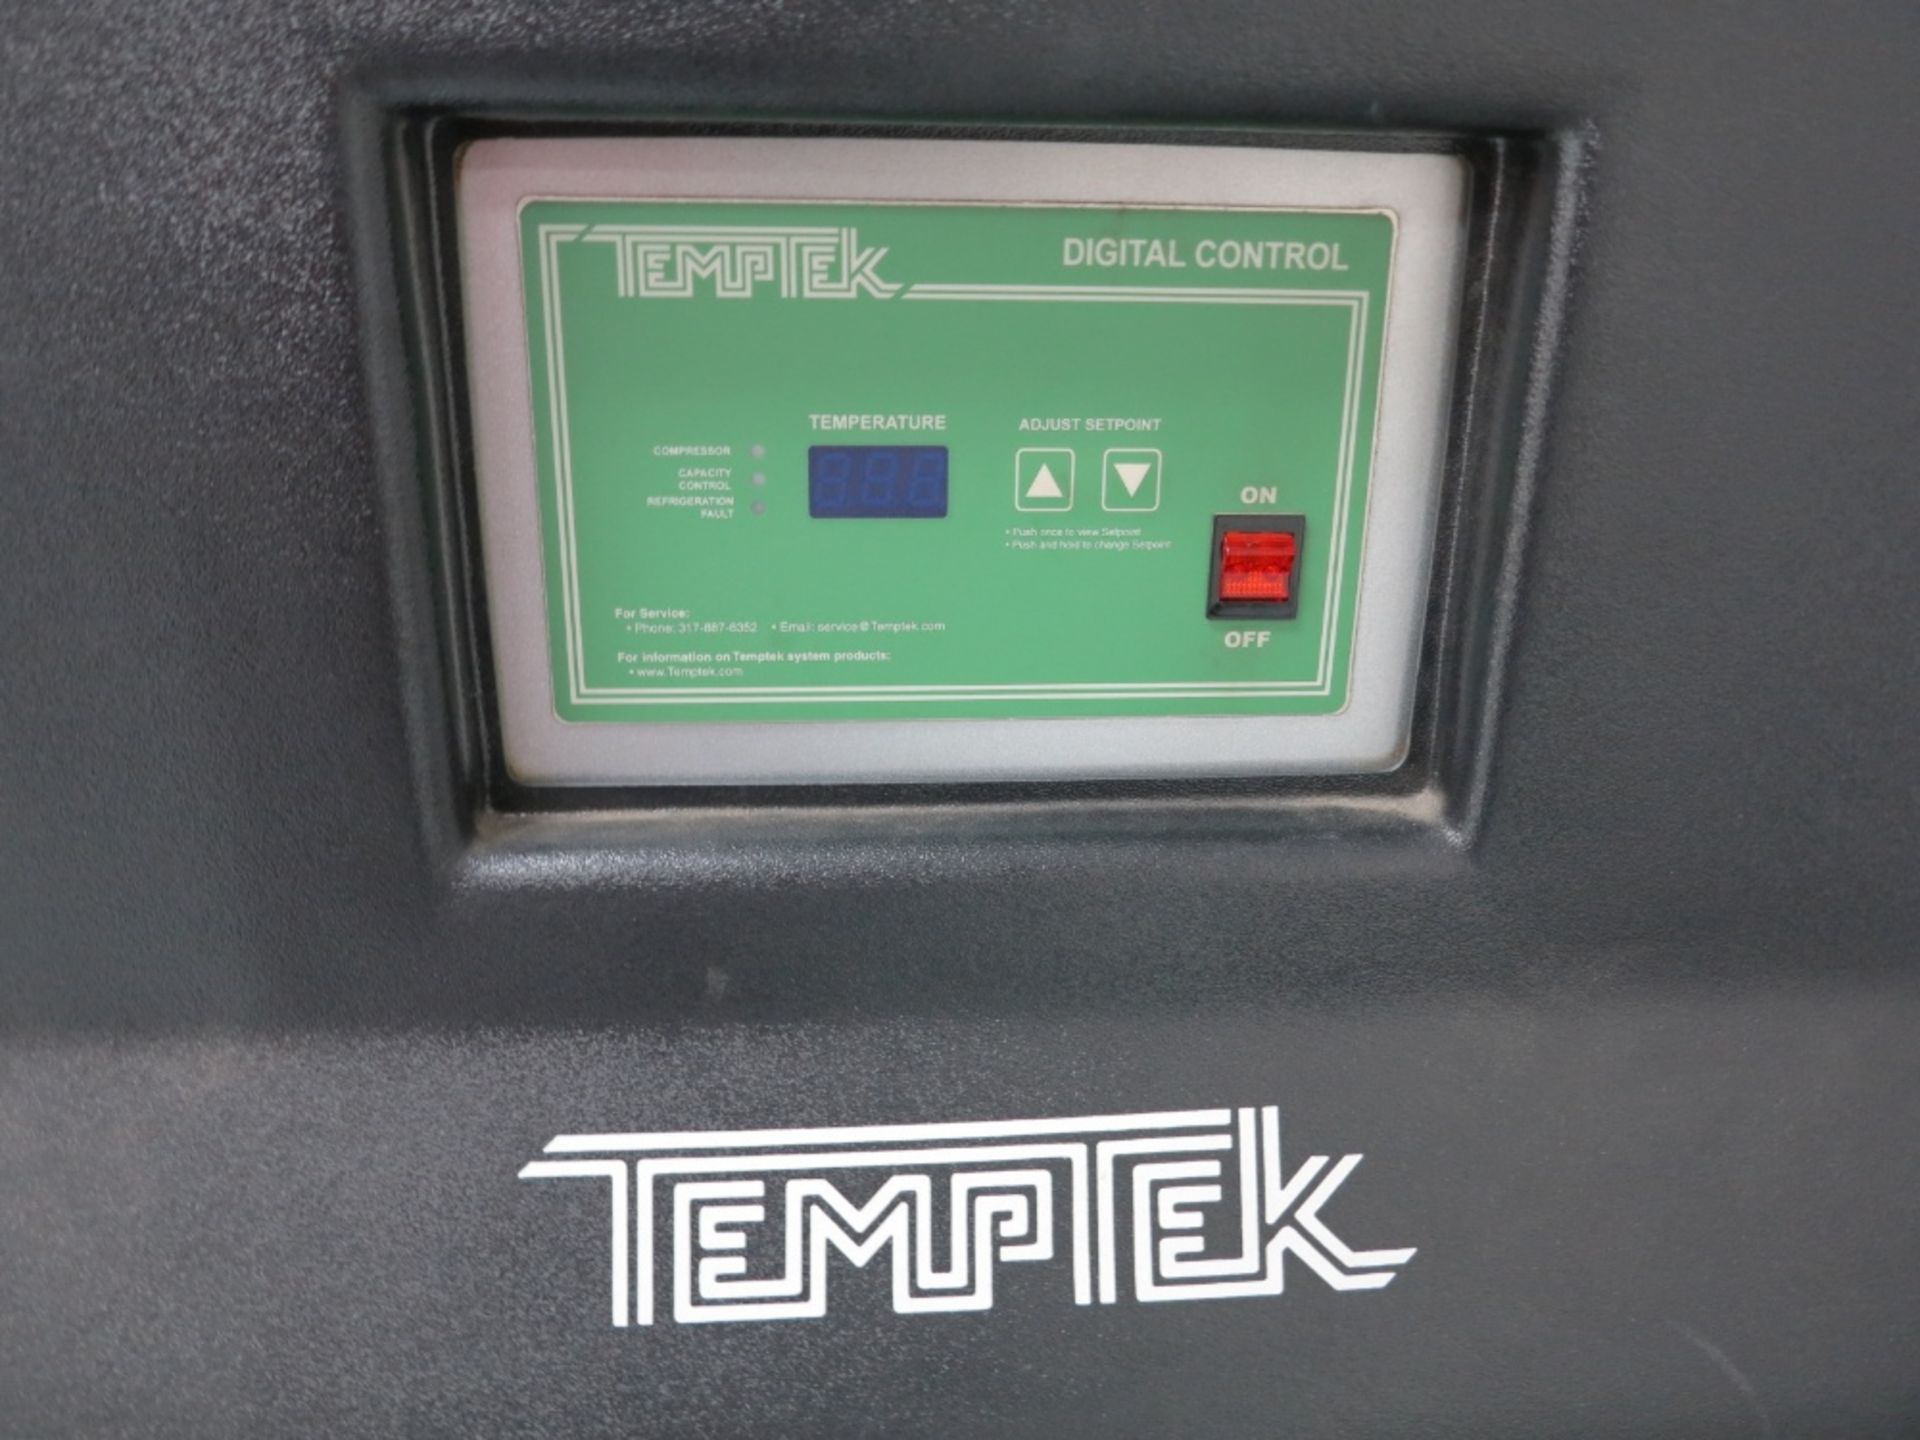 2008 TEMPTEK CF-7.5A, 7-1/2-TON AIR-COOLED PORTABLE WATER CHILLER, S/N 105324 - Image 2 of 2